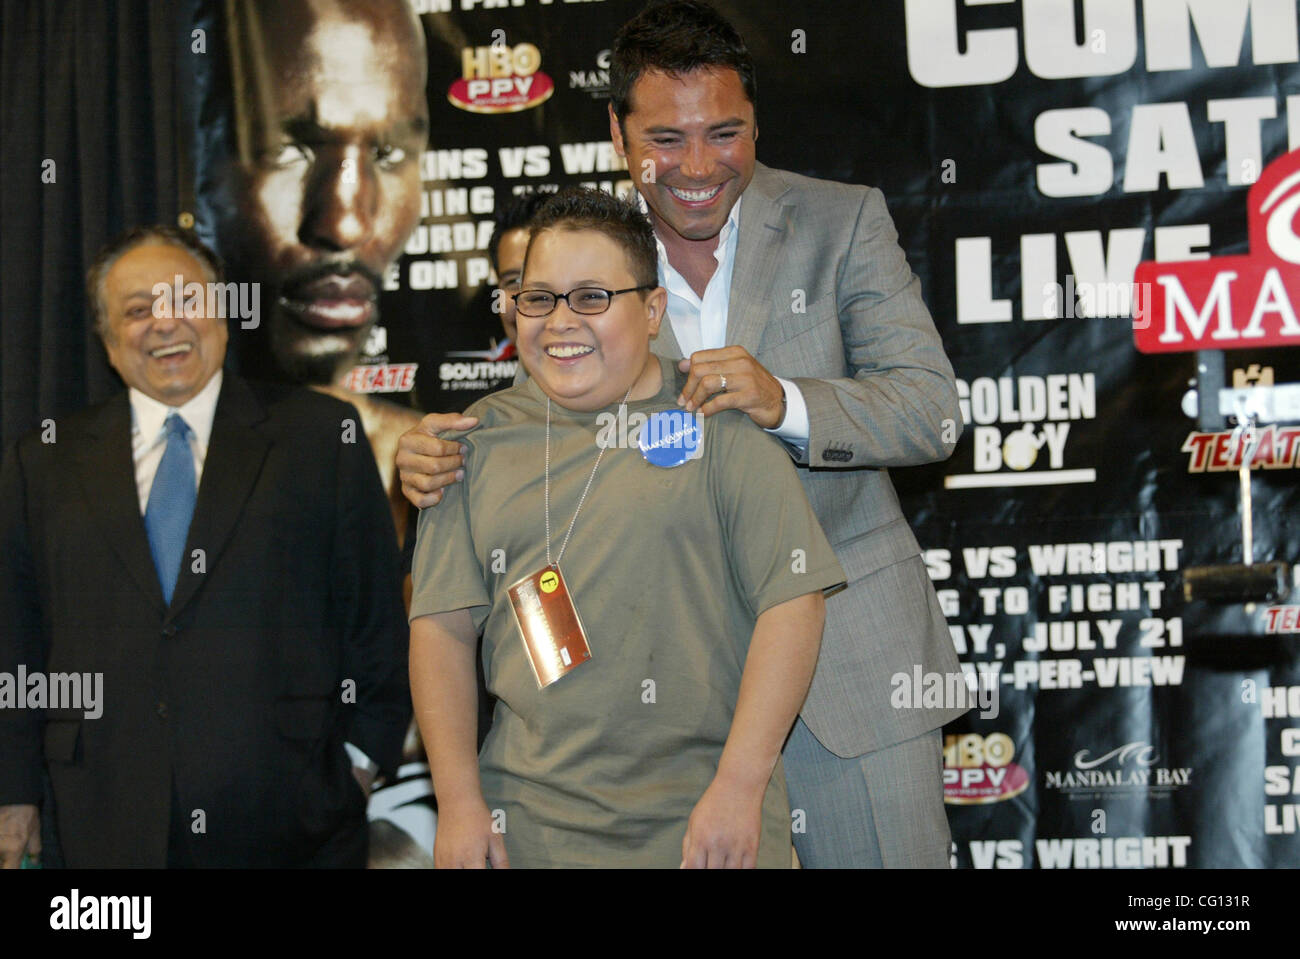 07-20-07 at the Manady Lay Bay Events Center during the BERNARD HOPKINS and  WINKY WRIGHT weigh-ins. Golden Boy Promoter and Champion Boxer OSCAR DE LA HOYA with CRUZ BARAJAS. Make a Wish Foundation is a foundation who makes it possible  for children who have cancer make their wishes come true, they Stock Photo